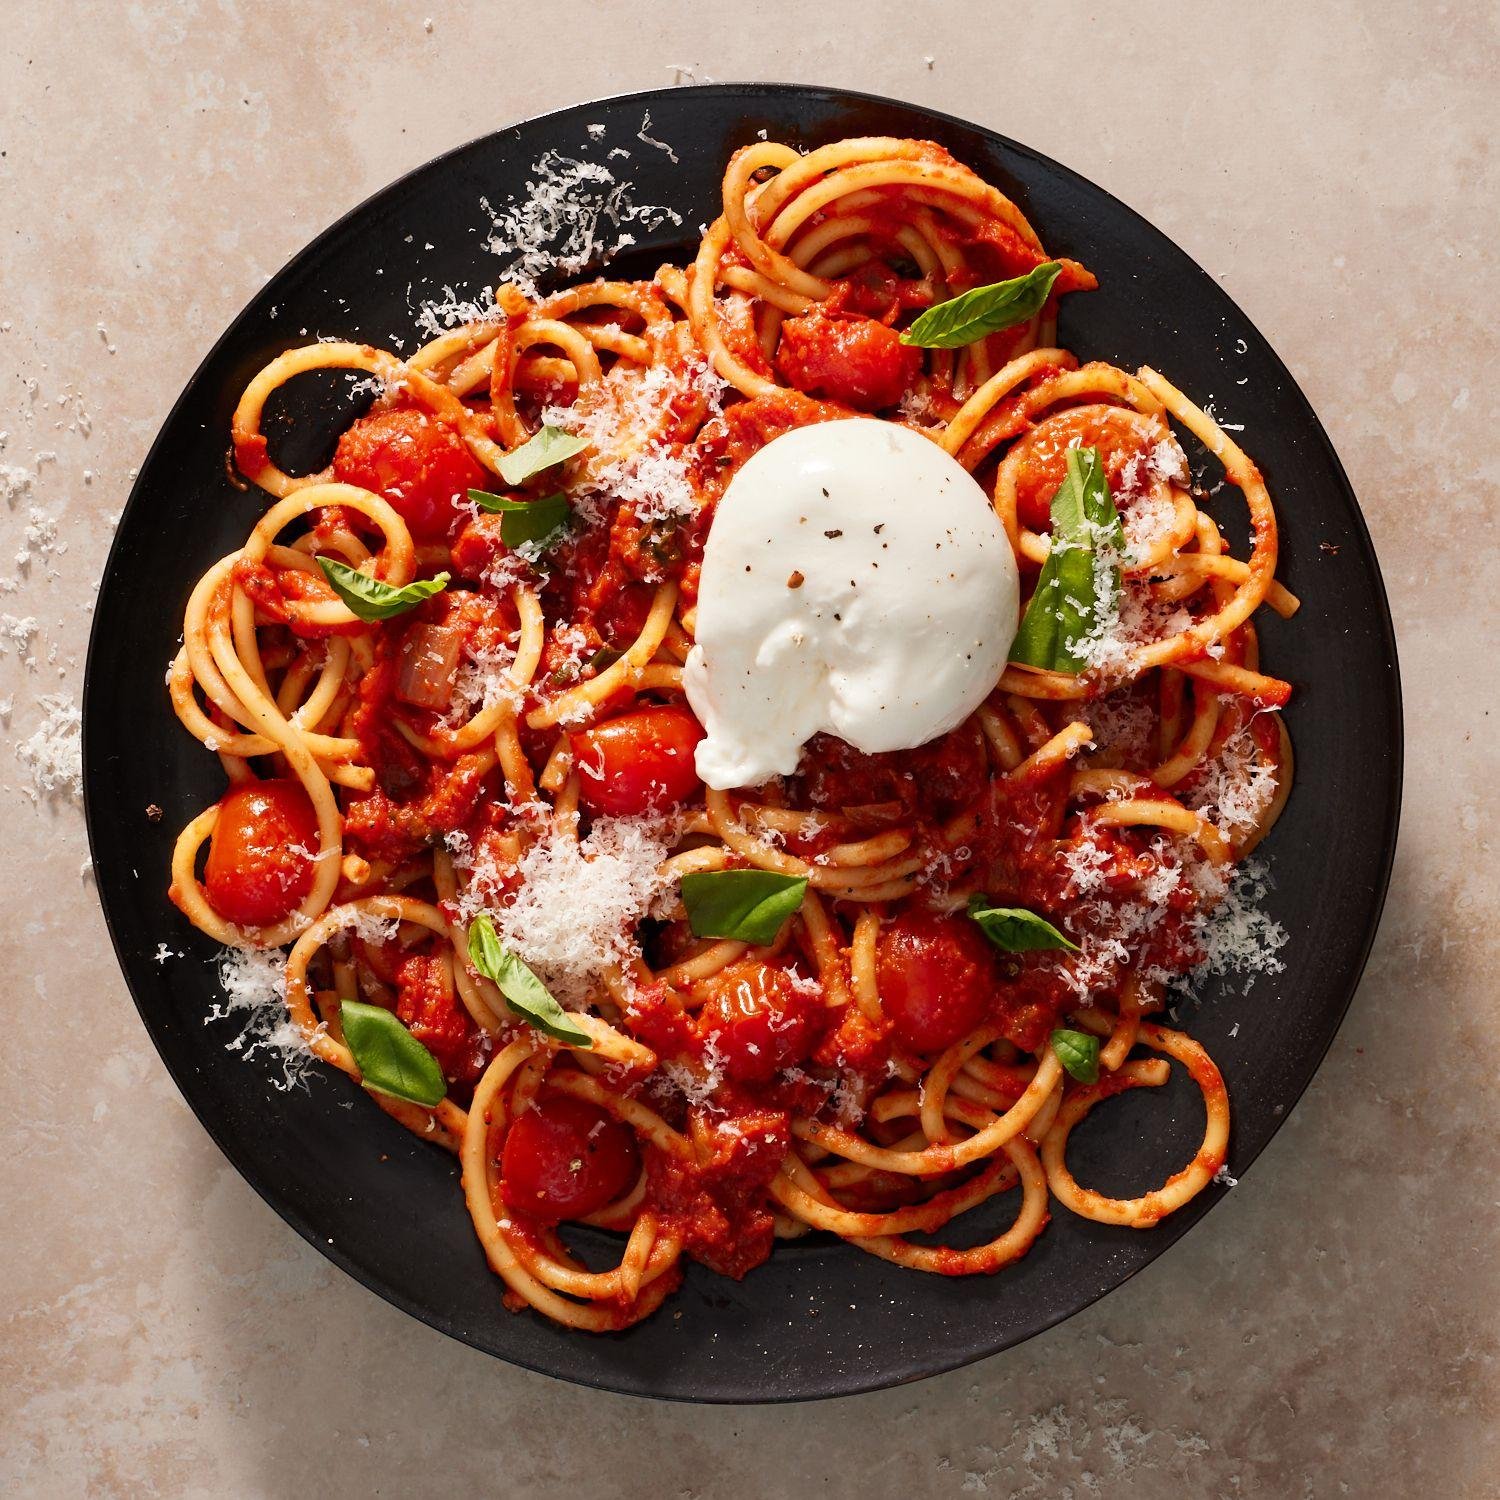 Delicious & Easy Pasta Recipes for Weeknight Dinners